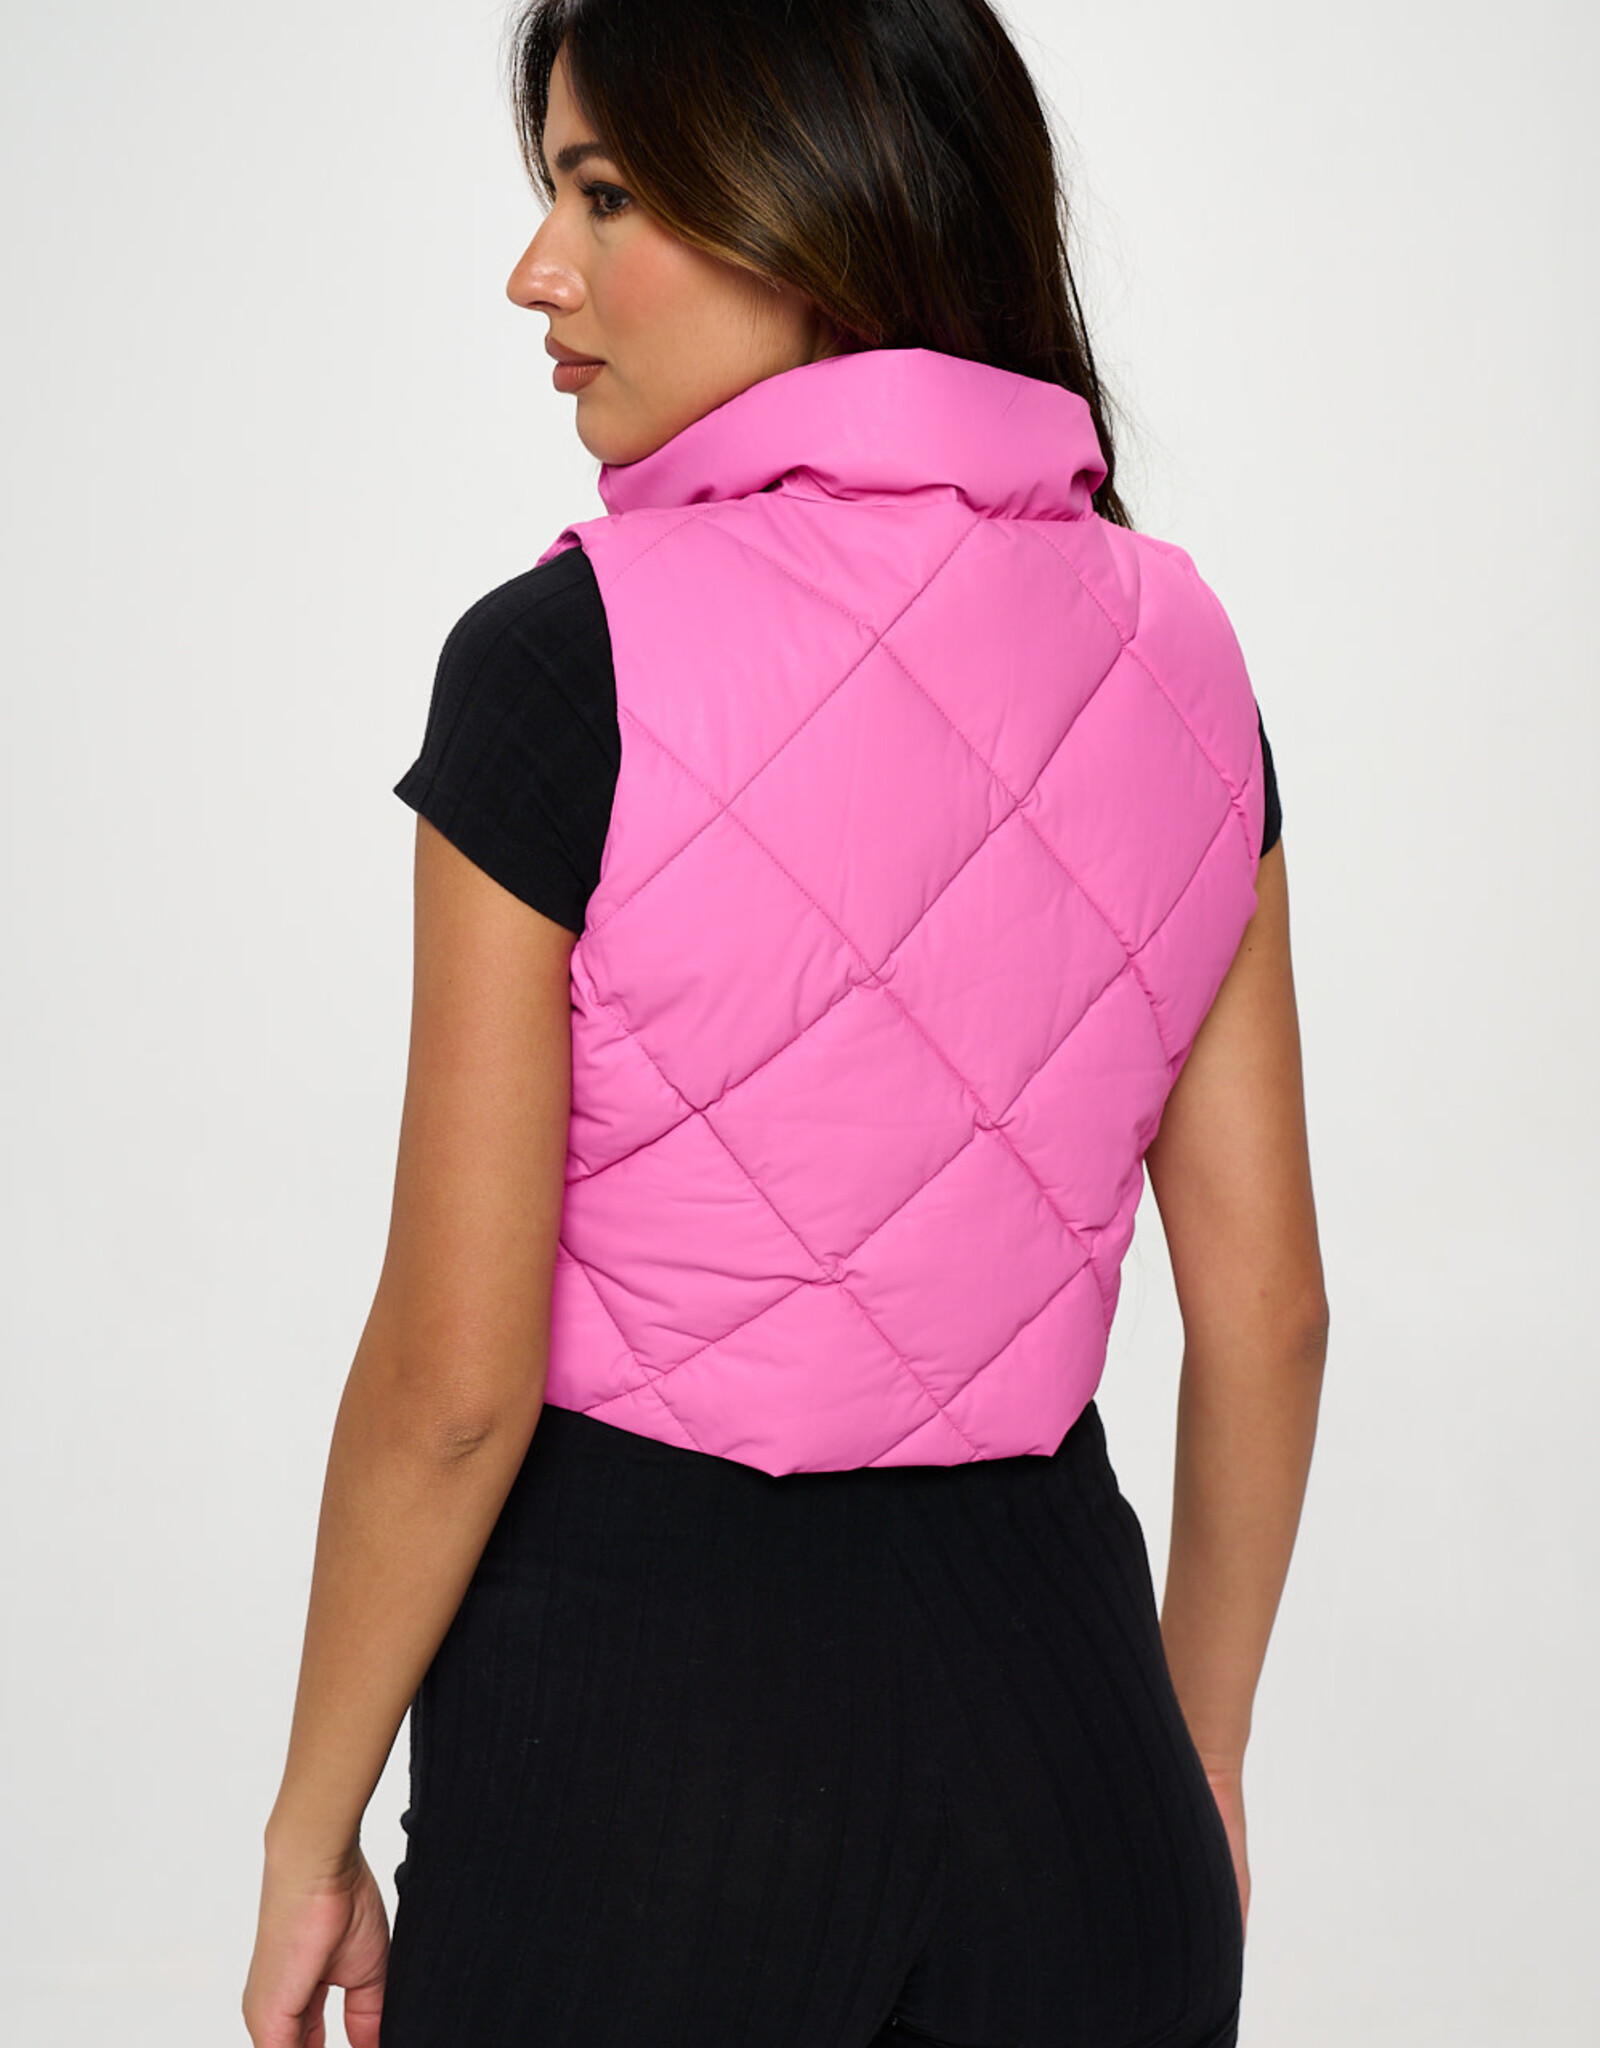 Vegan Leather Quilted Puffer Vest